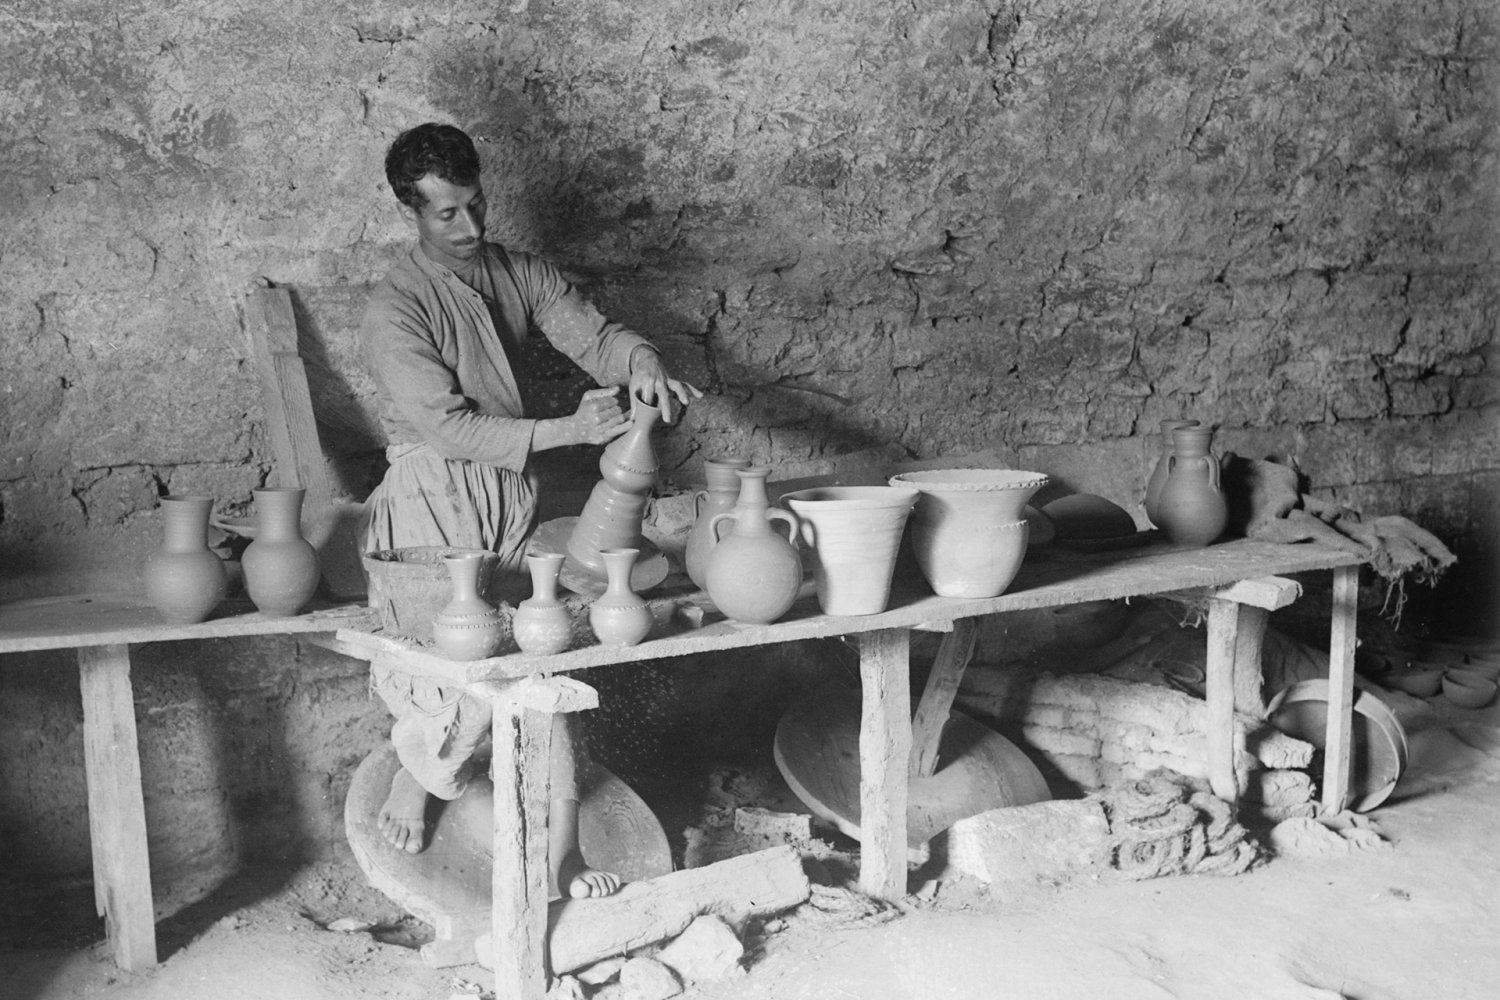 Male potter throwing a pot on the wheel at the Dome of the Rock Tiles Workshop on the Via Dolorsa, Jerusalem, 1920s